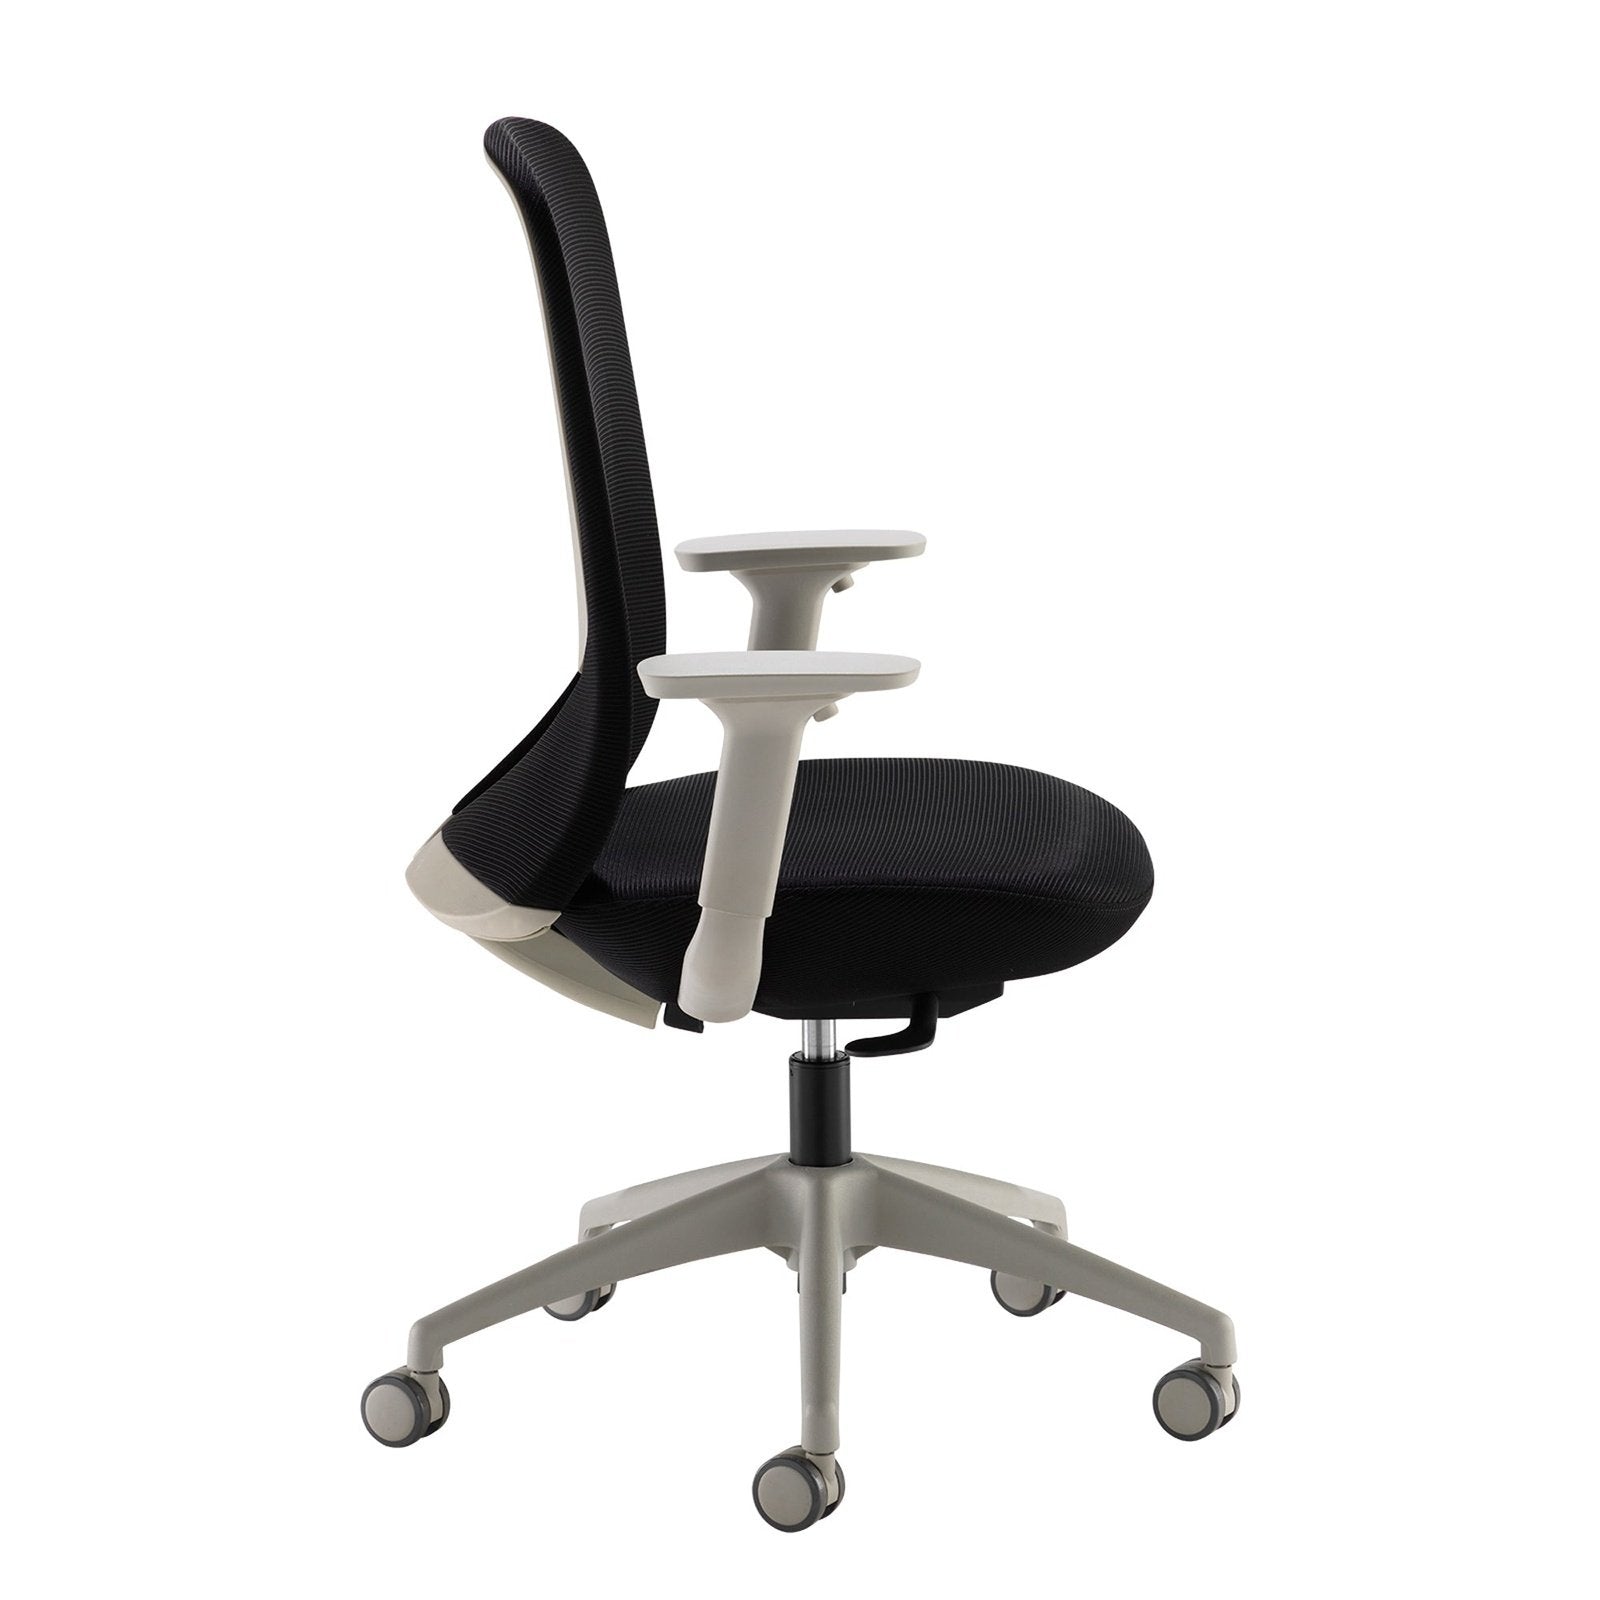 Sway mesh back adjustable operator chair with black fabric seat, grey frame and base - Office Products Online